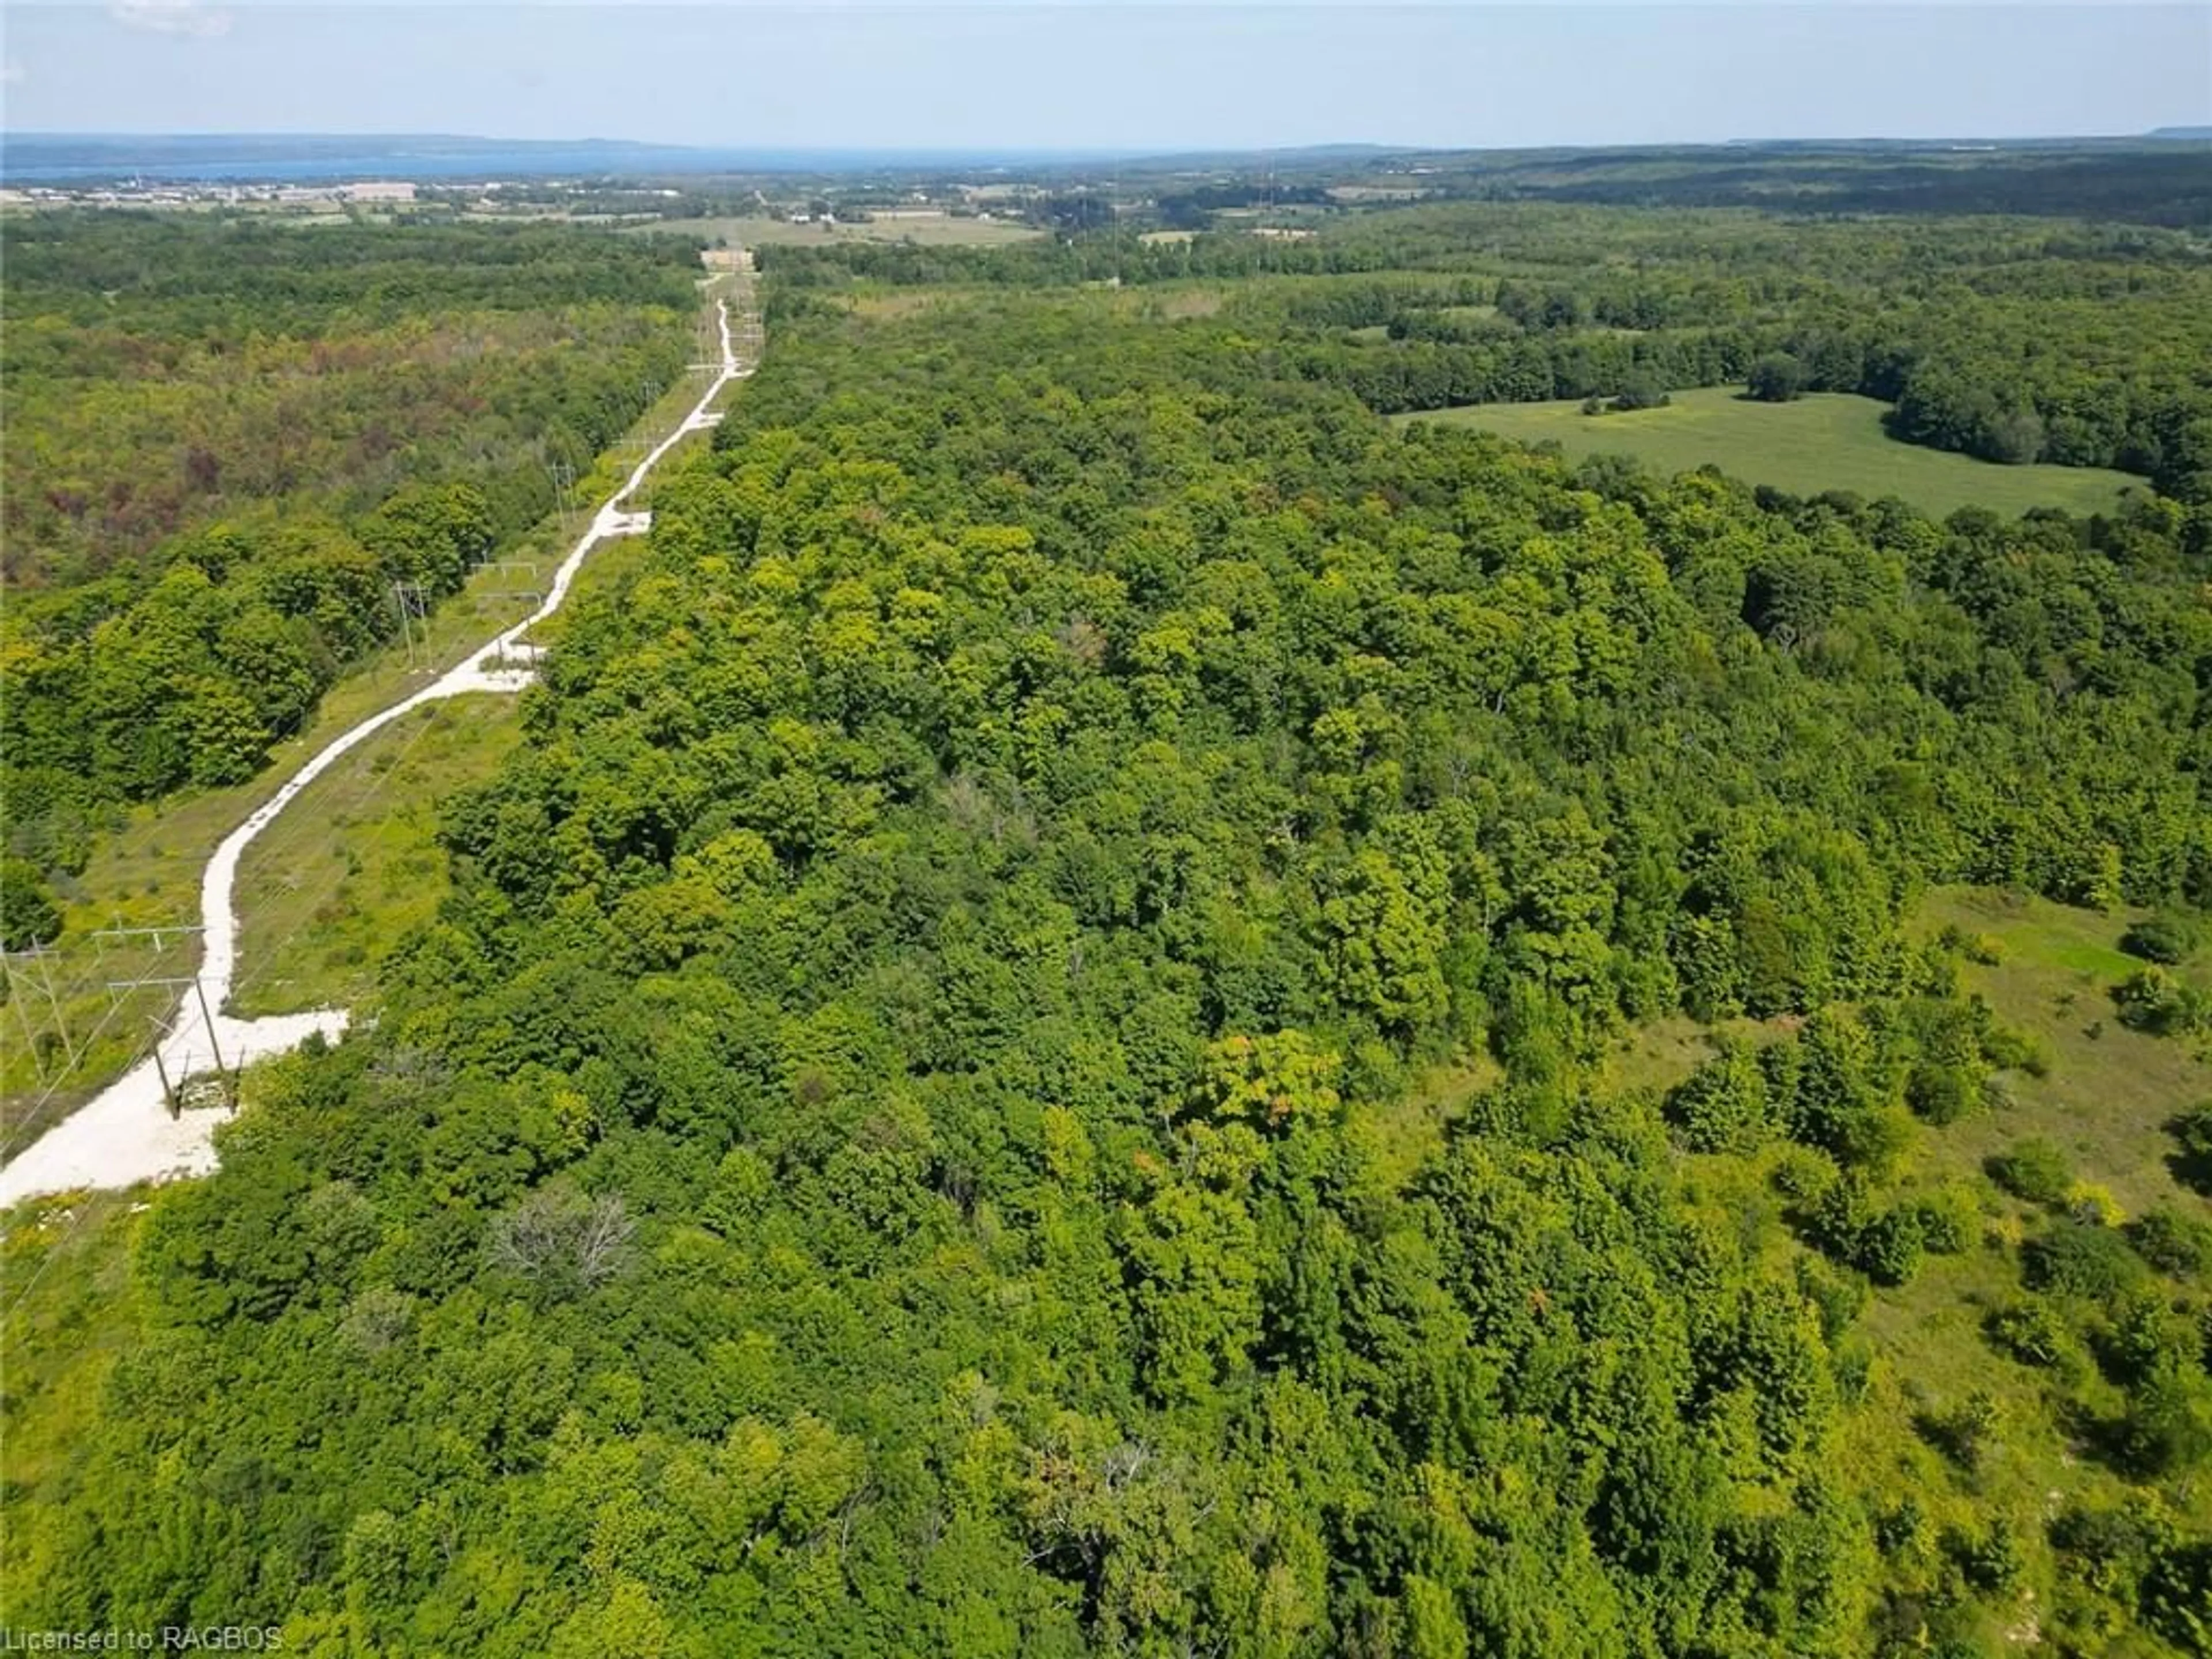 Forest view for PT LT 12 Concession 12 Sydenham, Meaford Municipality Ontario N4K 5N6